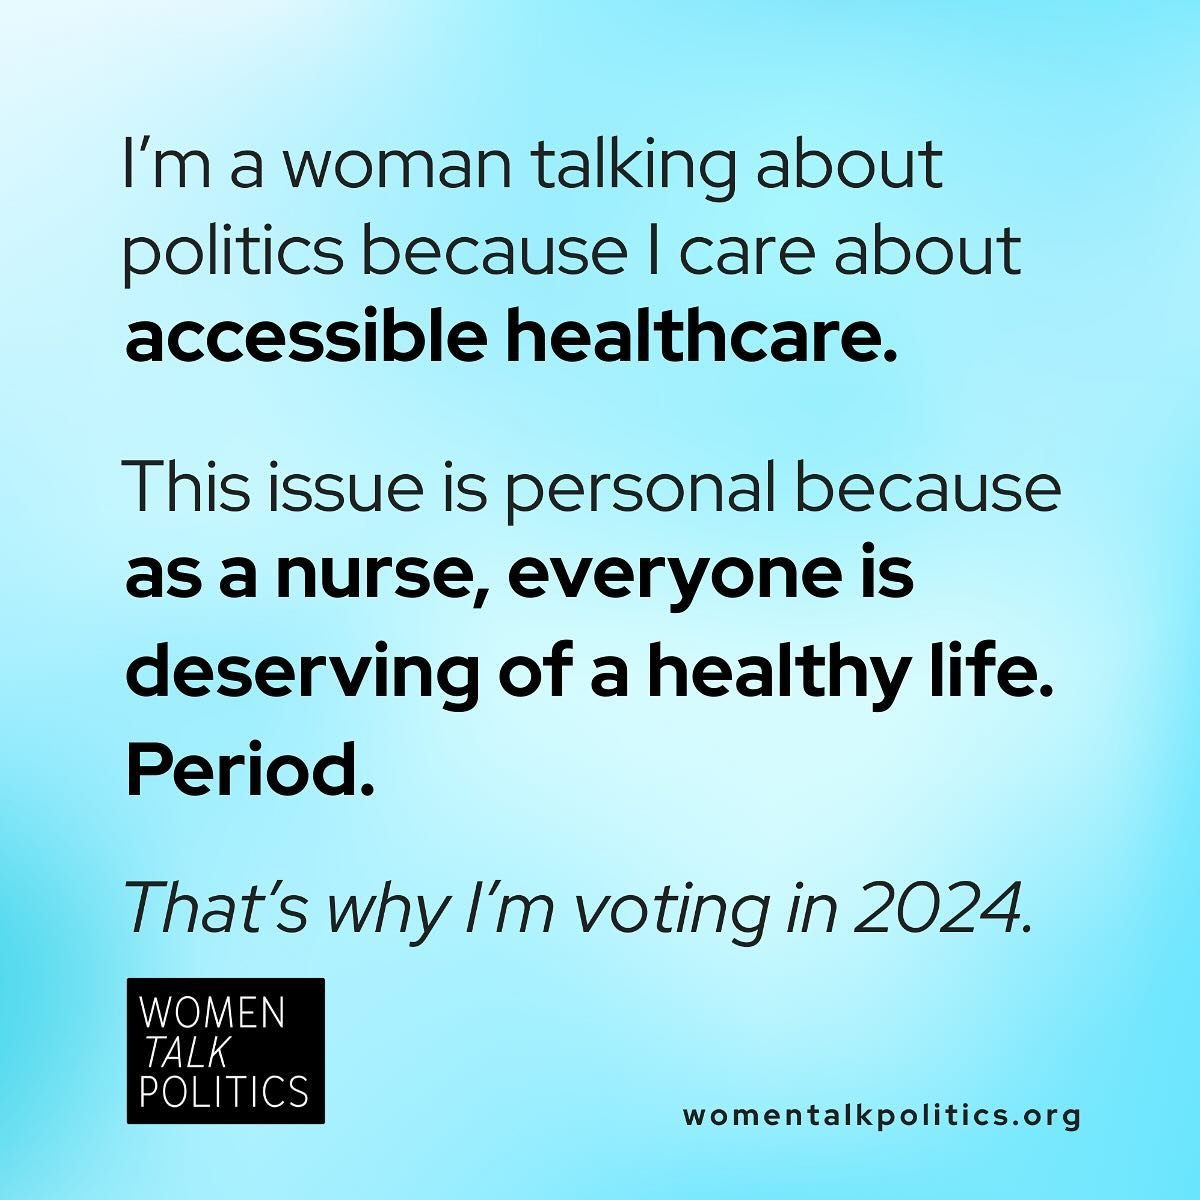 Two years ago, the draft majority opinion that would overturn Roe v. Wade was leaked and reproductive rights across the country were put at risk. Today, I&rsquo;m participating in Women Talk Politics Day because everyone is deserving of accessible he